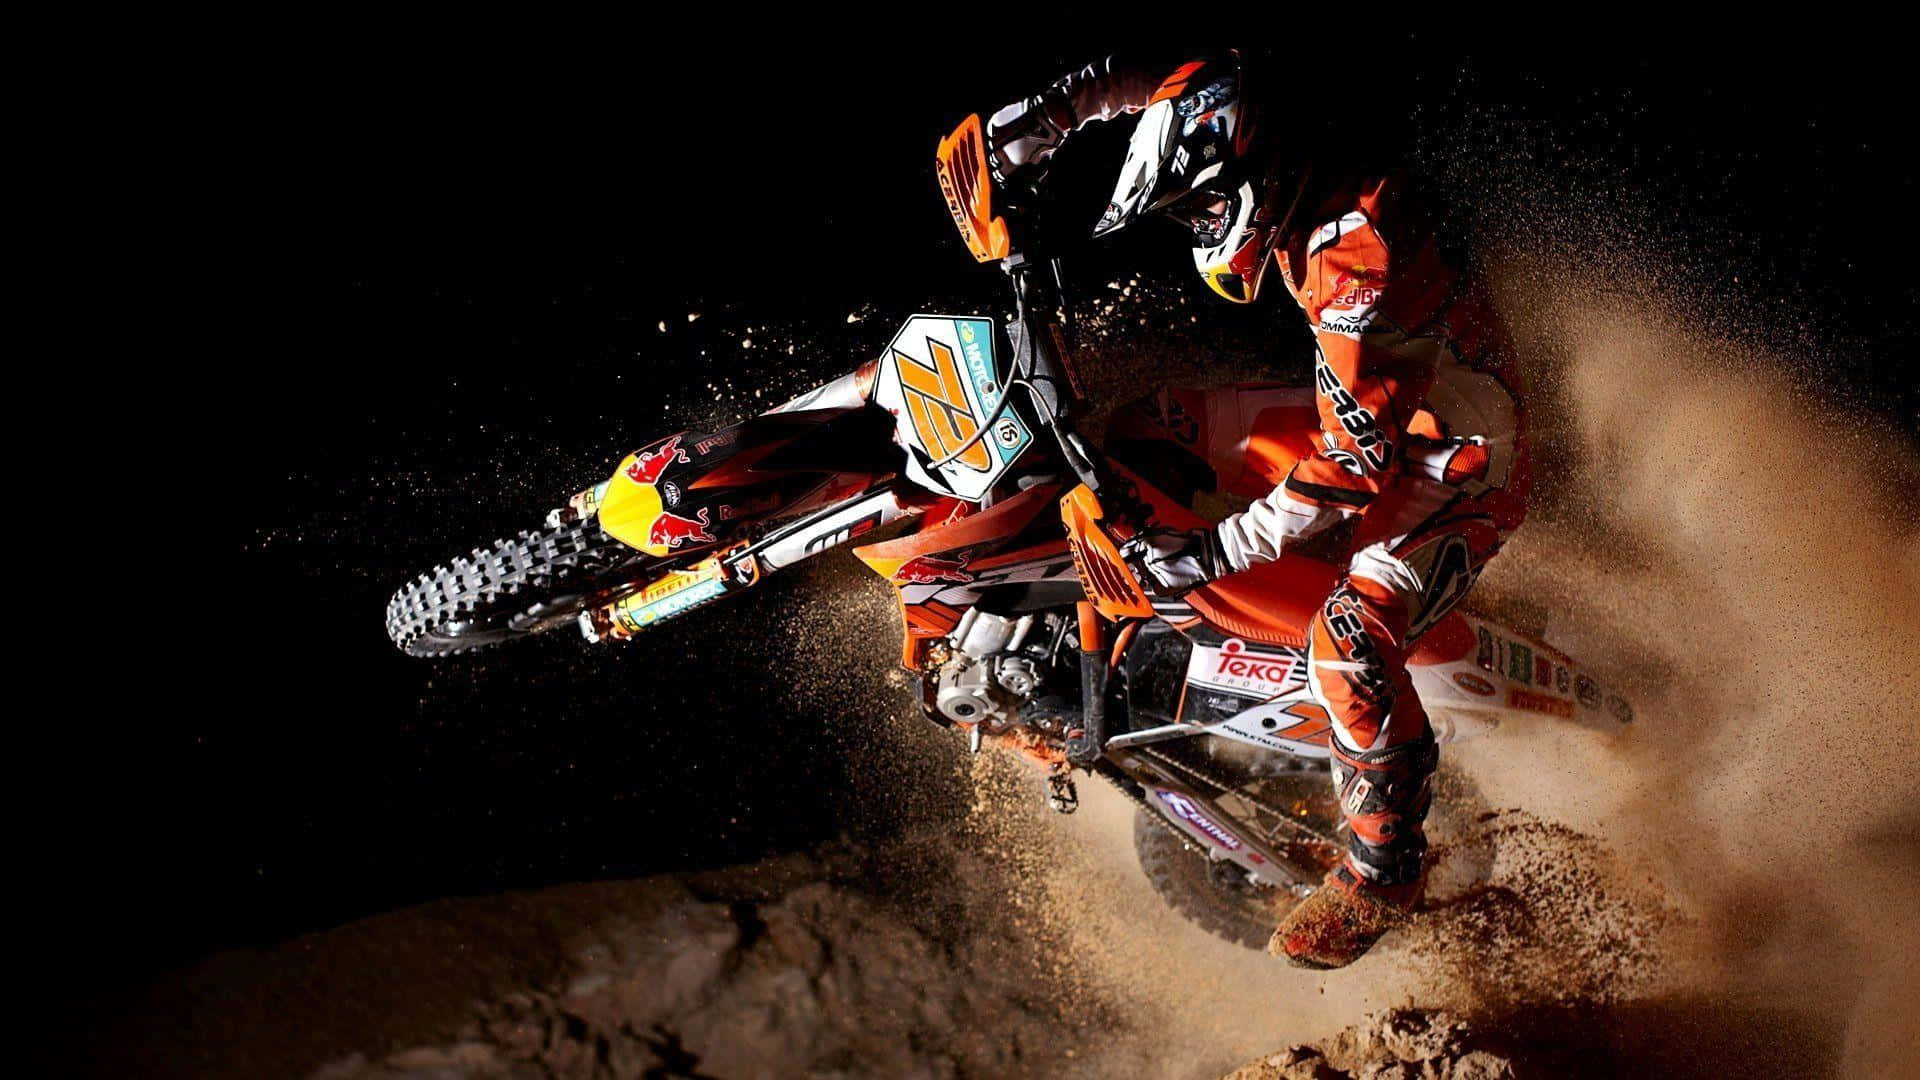 Thrilling Motocross Race in Action